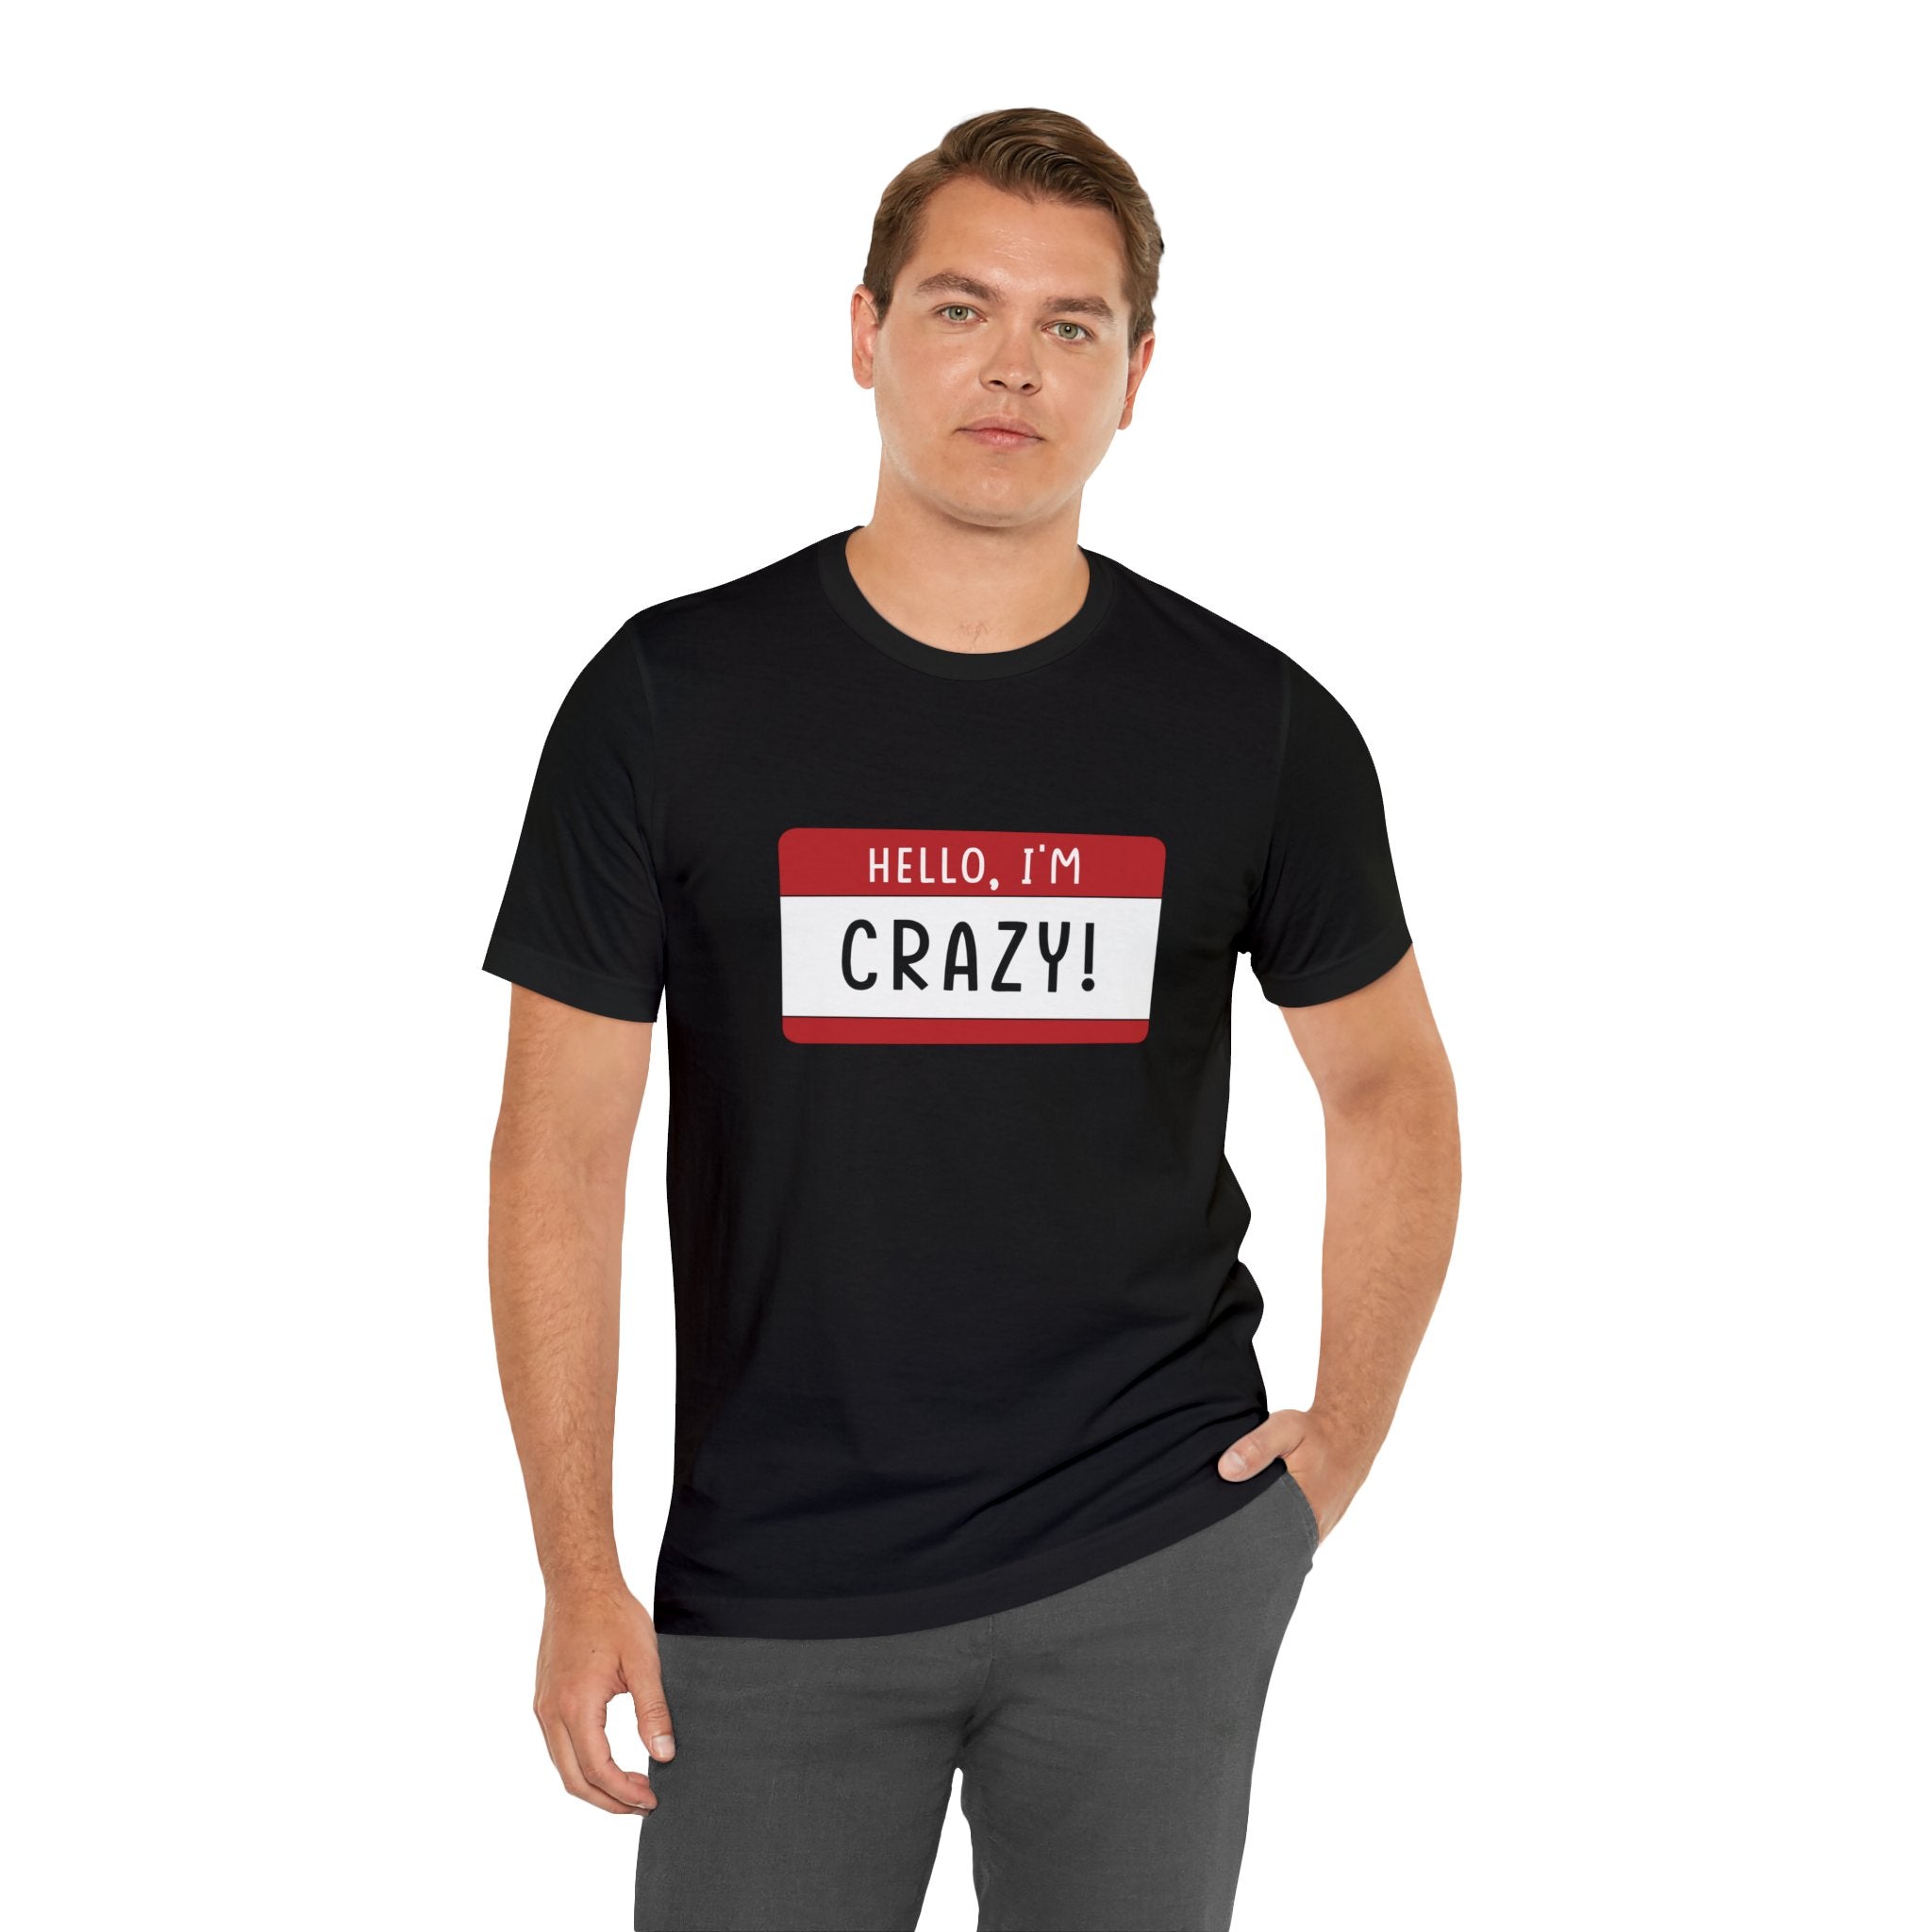 A man wearing a quirky black Hello, I'm CRAZY T-shirt stands against a white background.